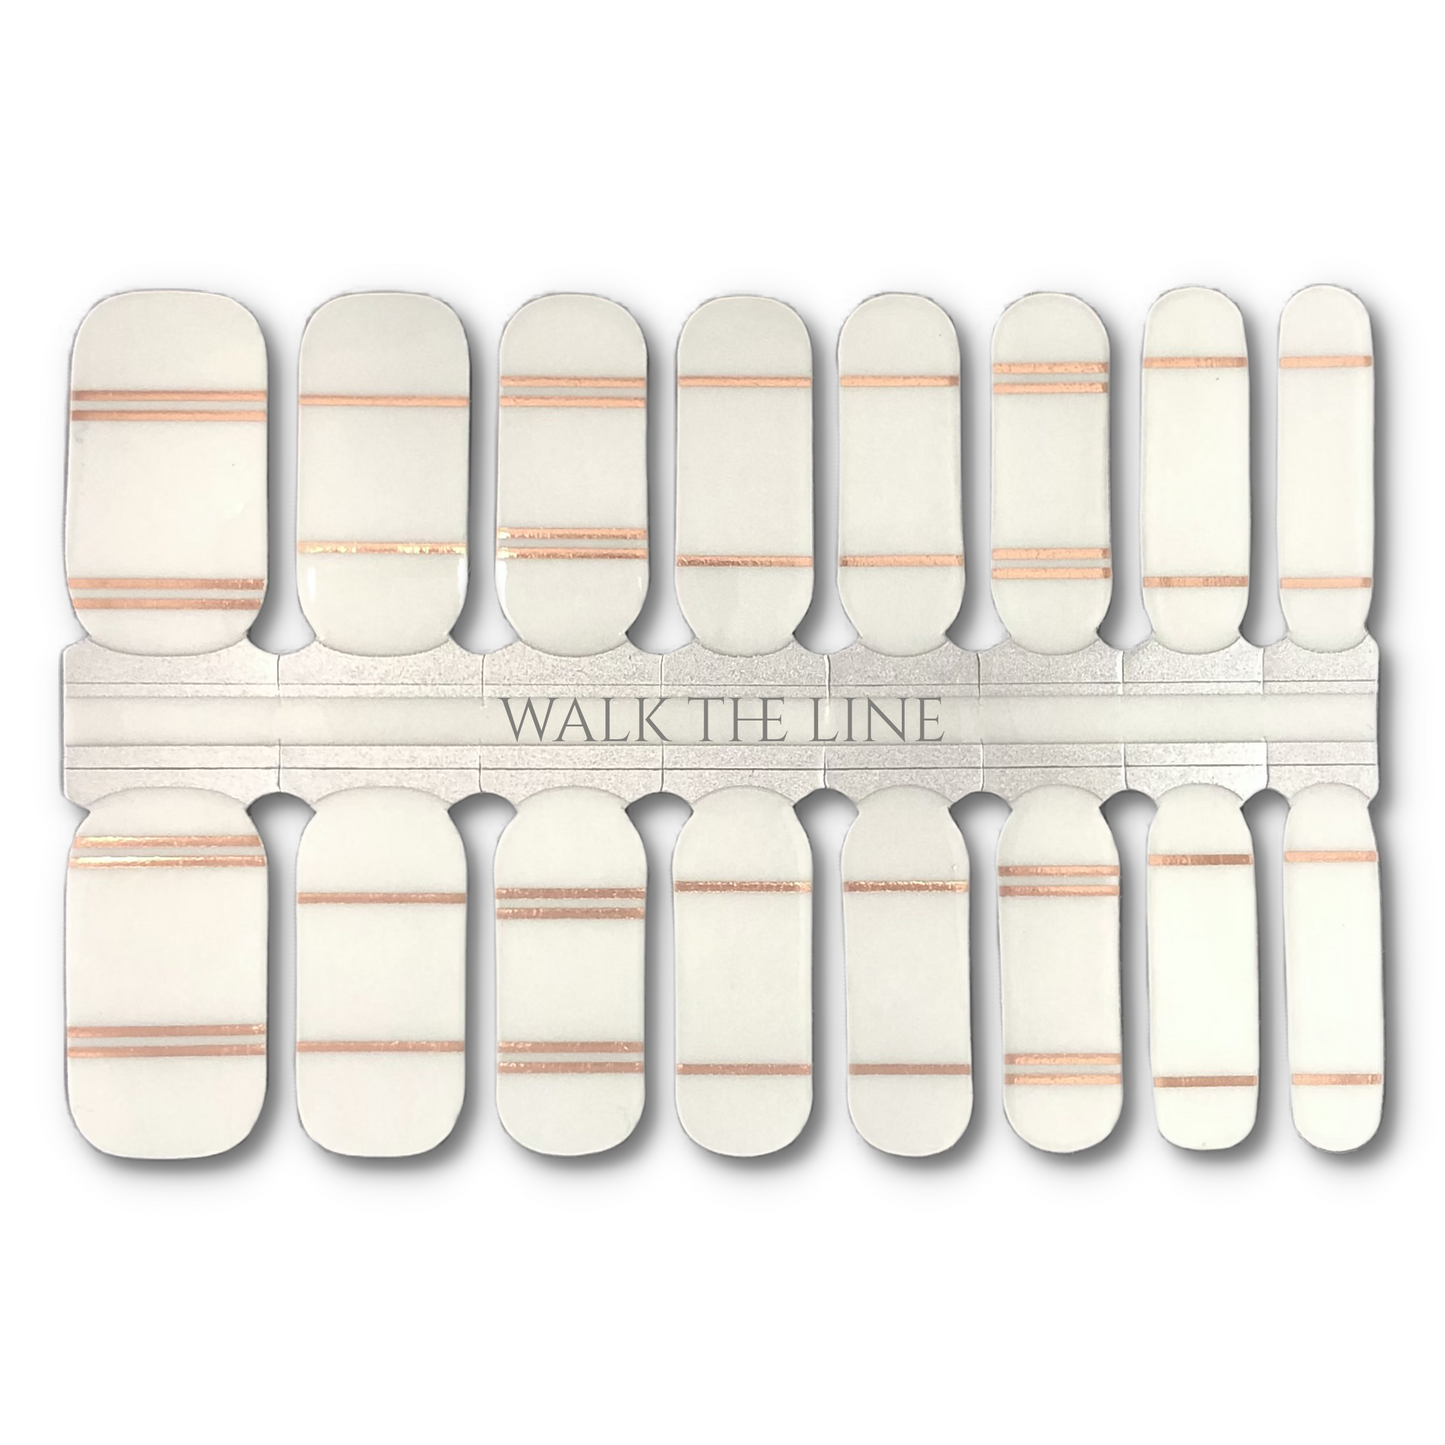 16 Real nail polish strips also called nail wraps or nail stickers.  Transparent with rose gold lines. Perfect to jazz up  a solid wrap or add to a design.